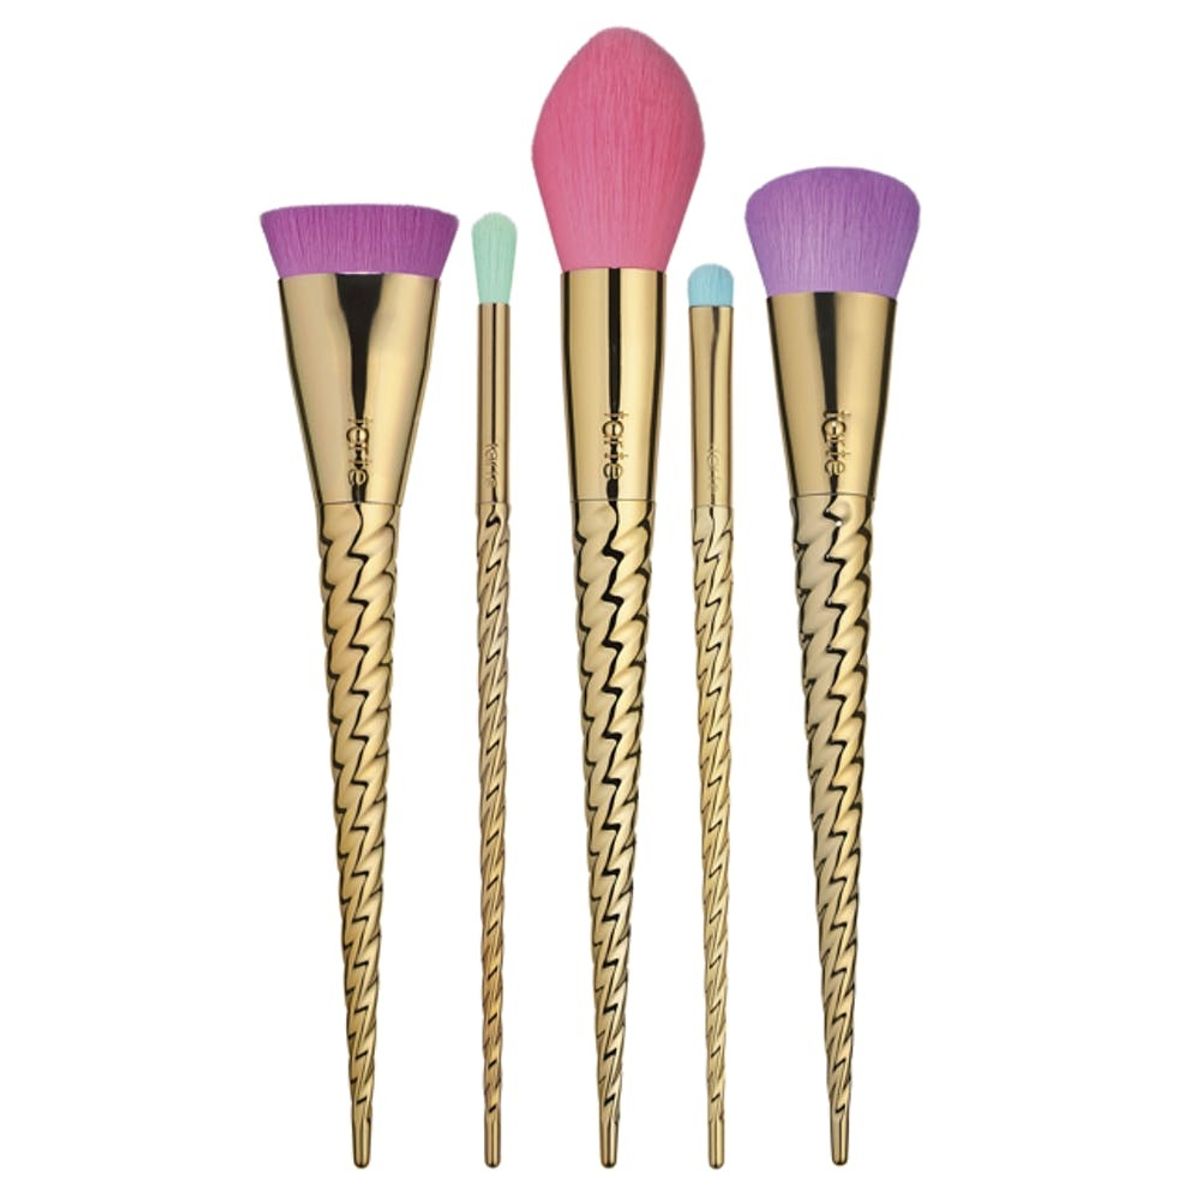 This Major Makeup Brand Just Jumped on the Unicorn Brush Train